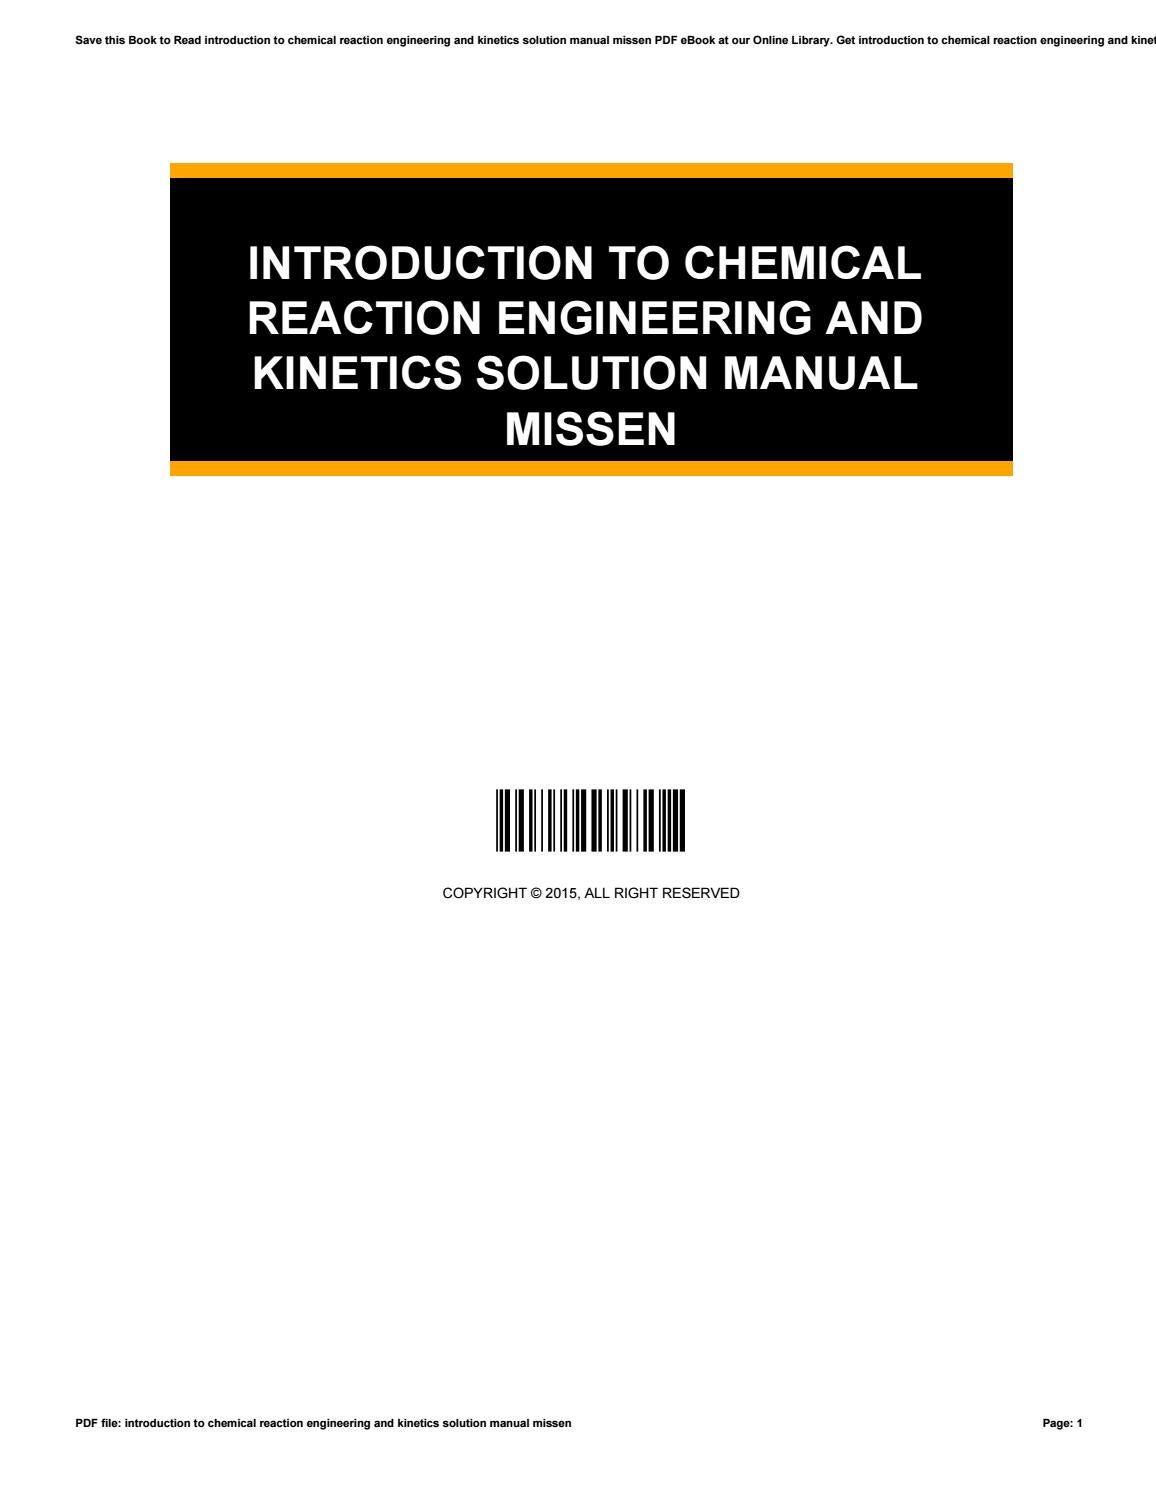 chemical kinetics and reaction dynamics solution manual pdf